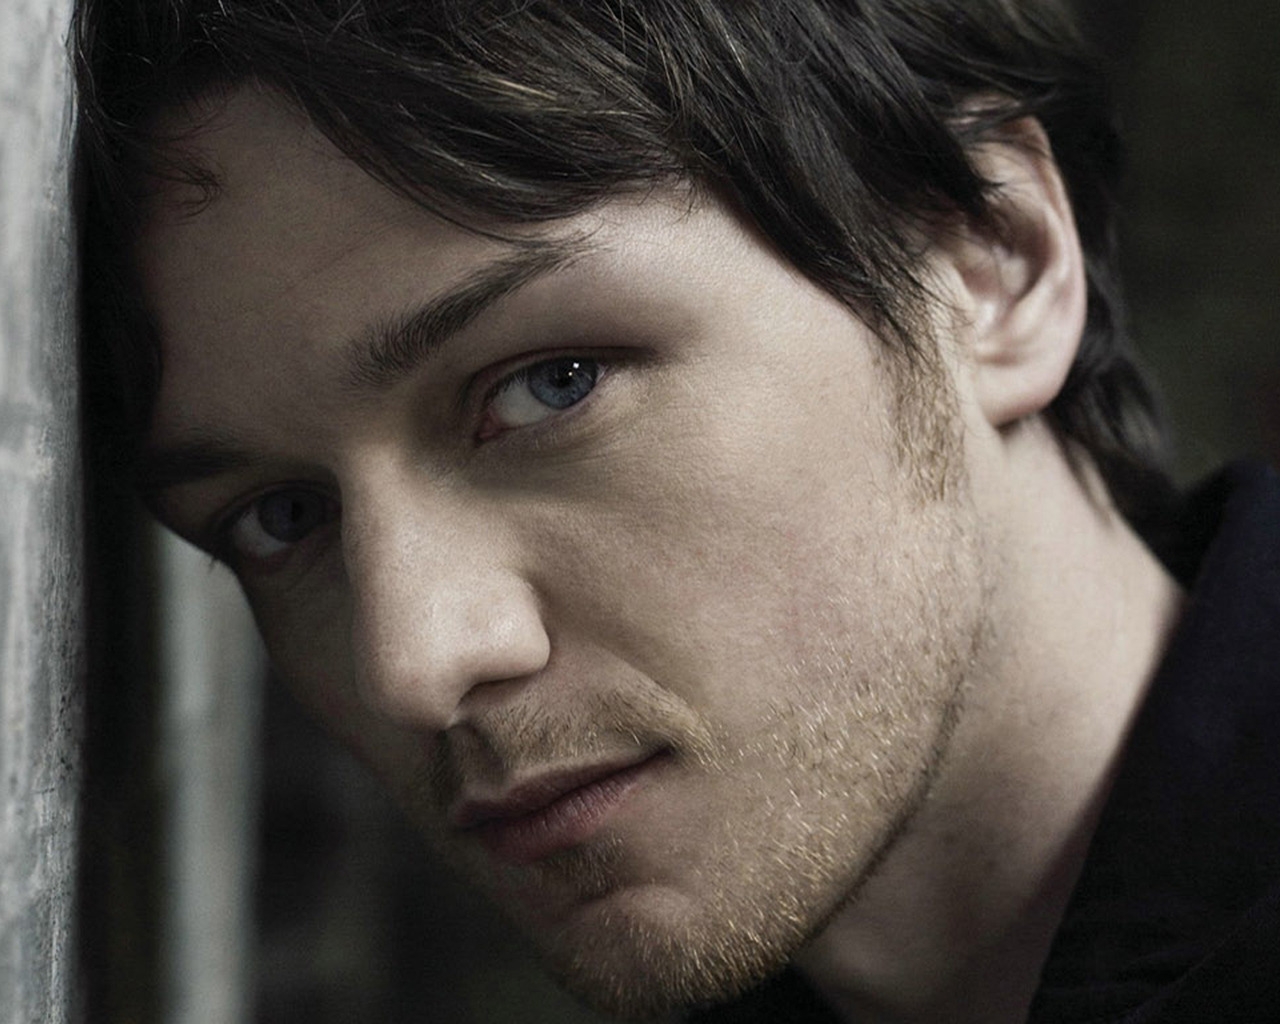 James Mcavoy for 1280 x 1024 resolution